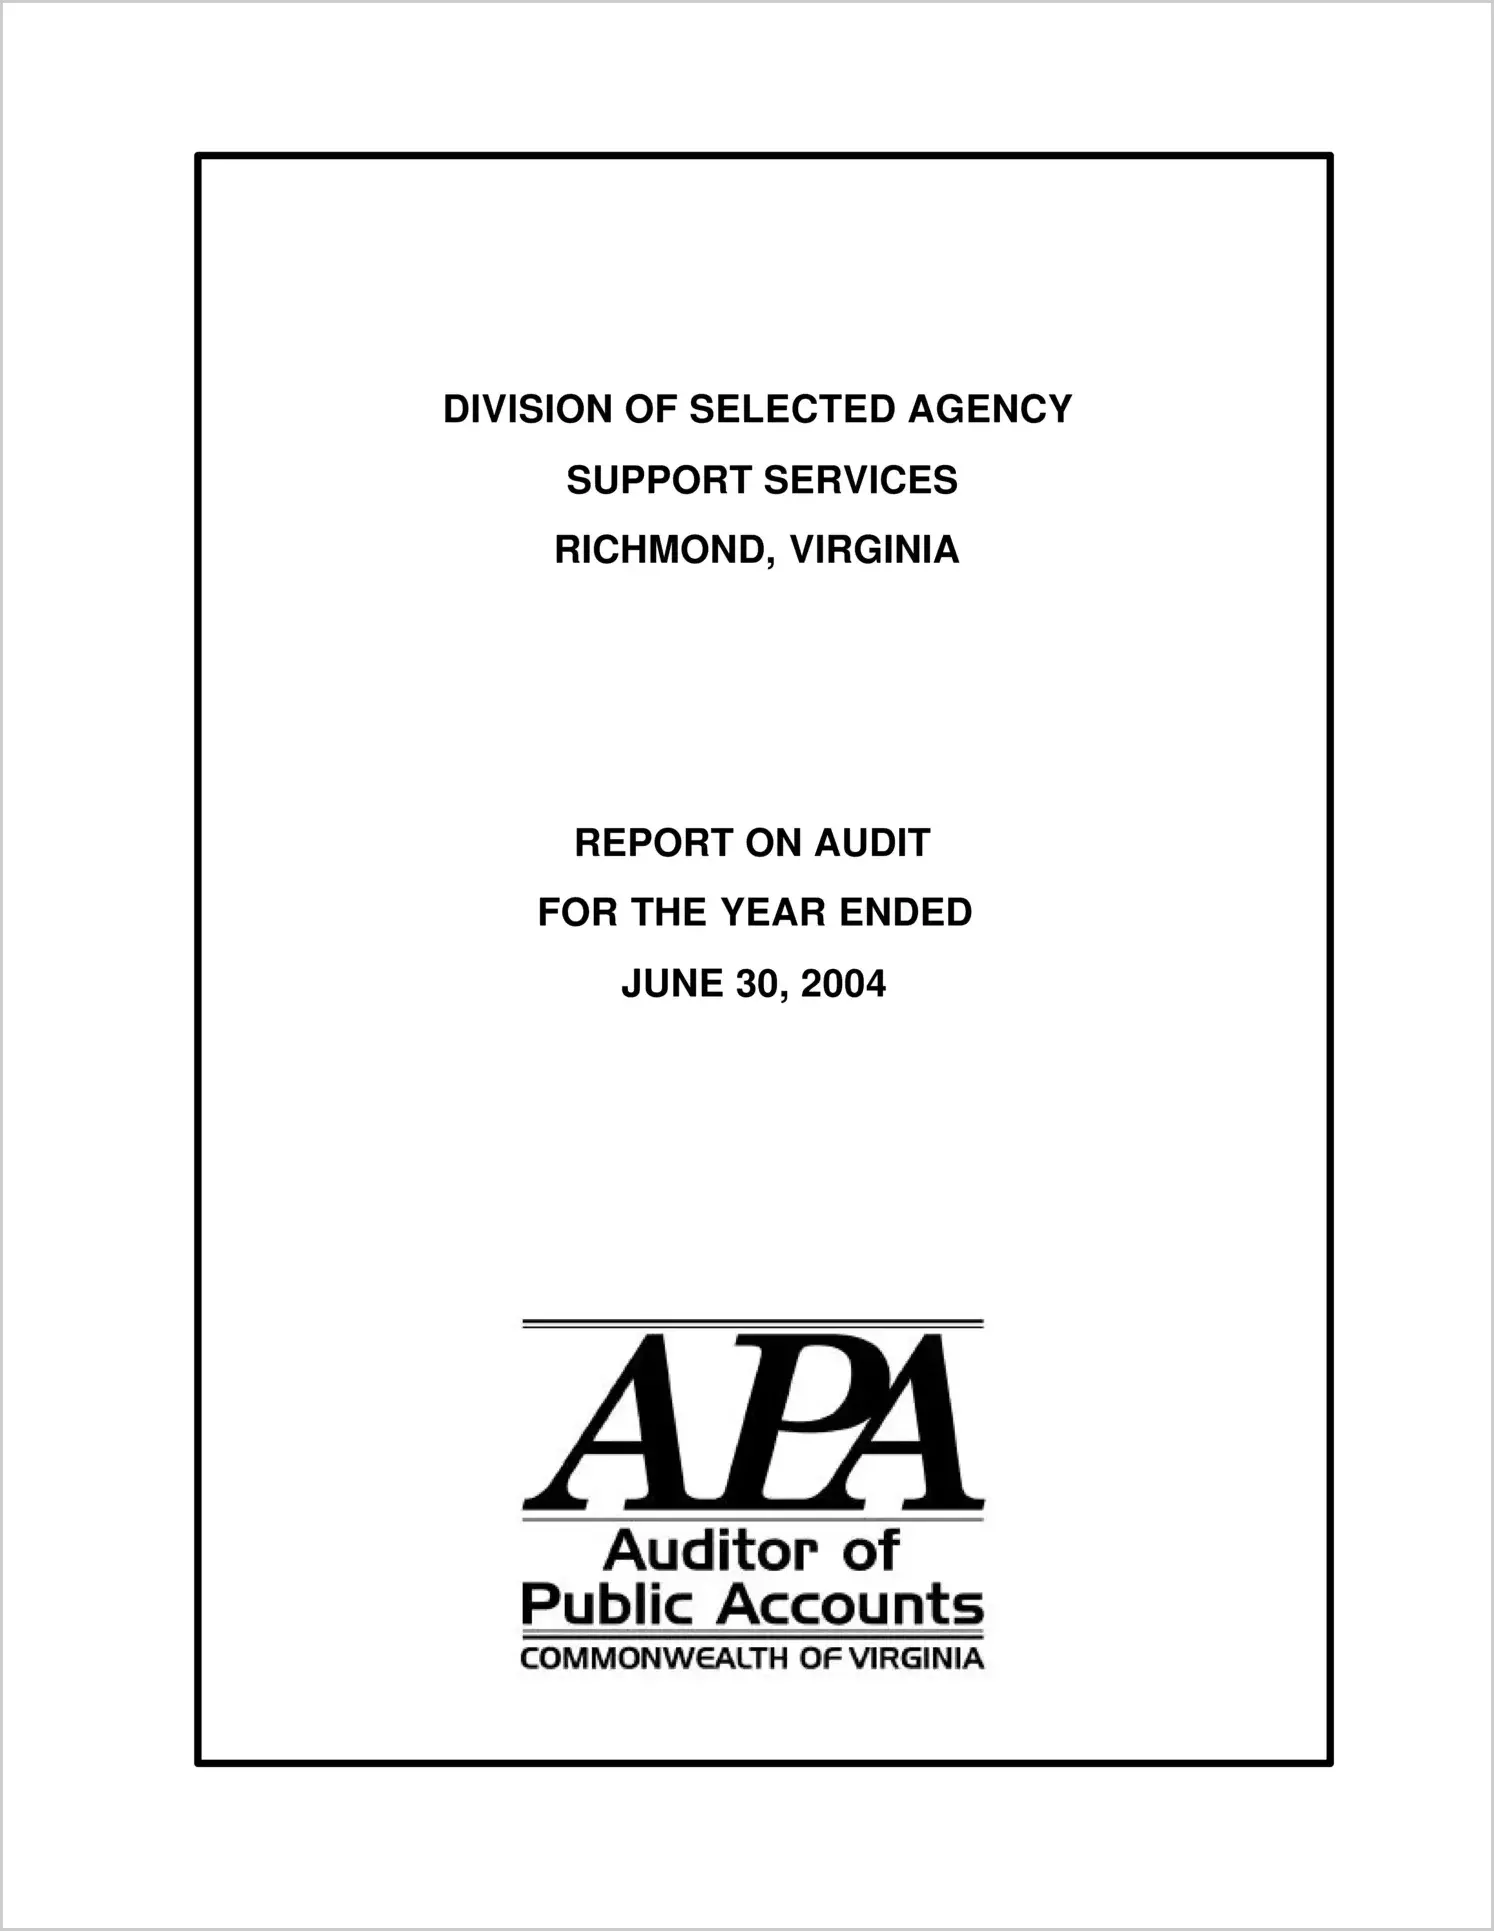 Division of Selected Agency Support Services for the year ended June 30, 2004